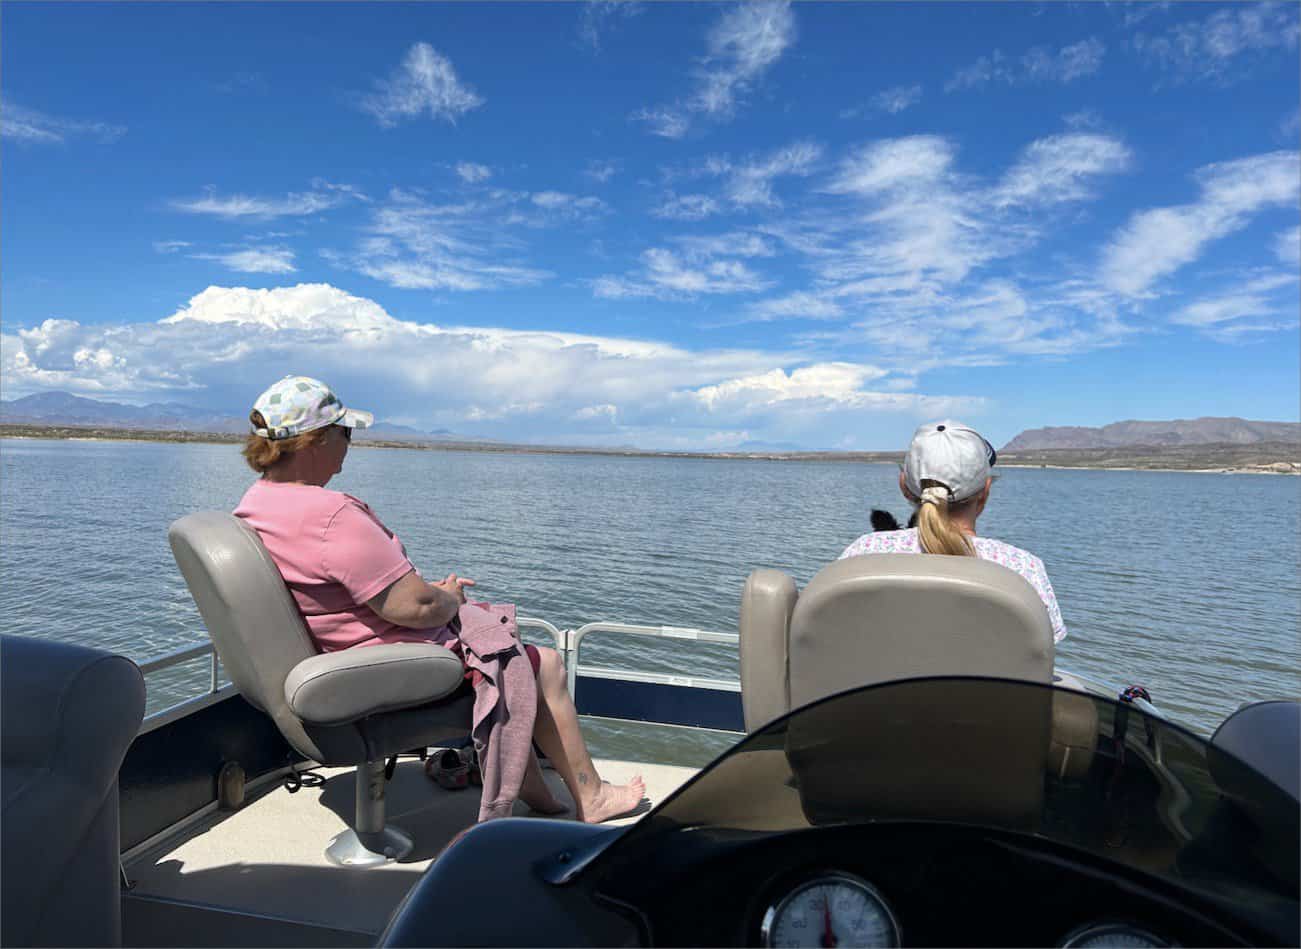 Two women sitting in the back of a boat on a lake in New Mexico.